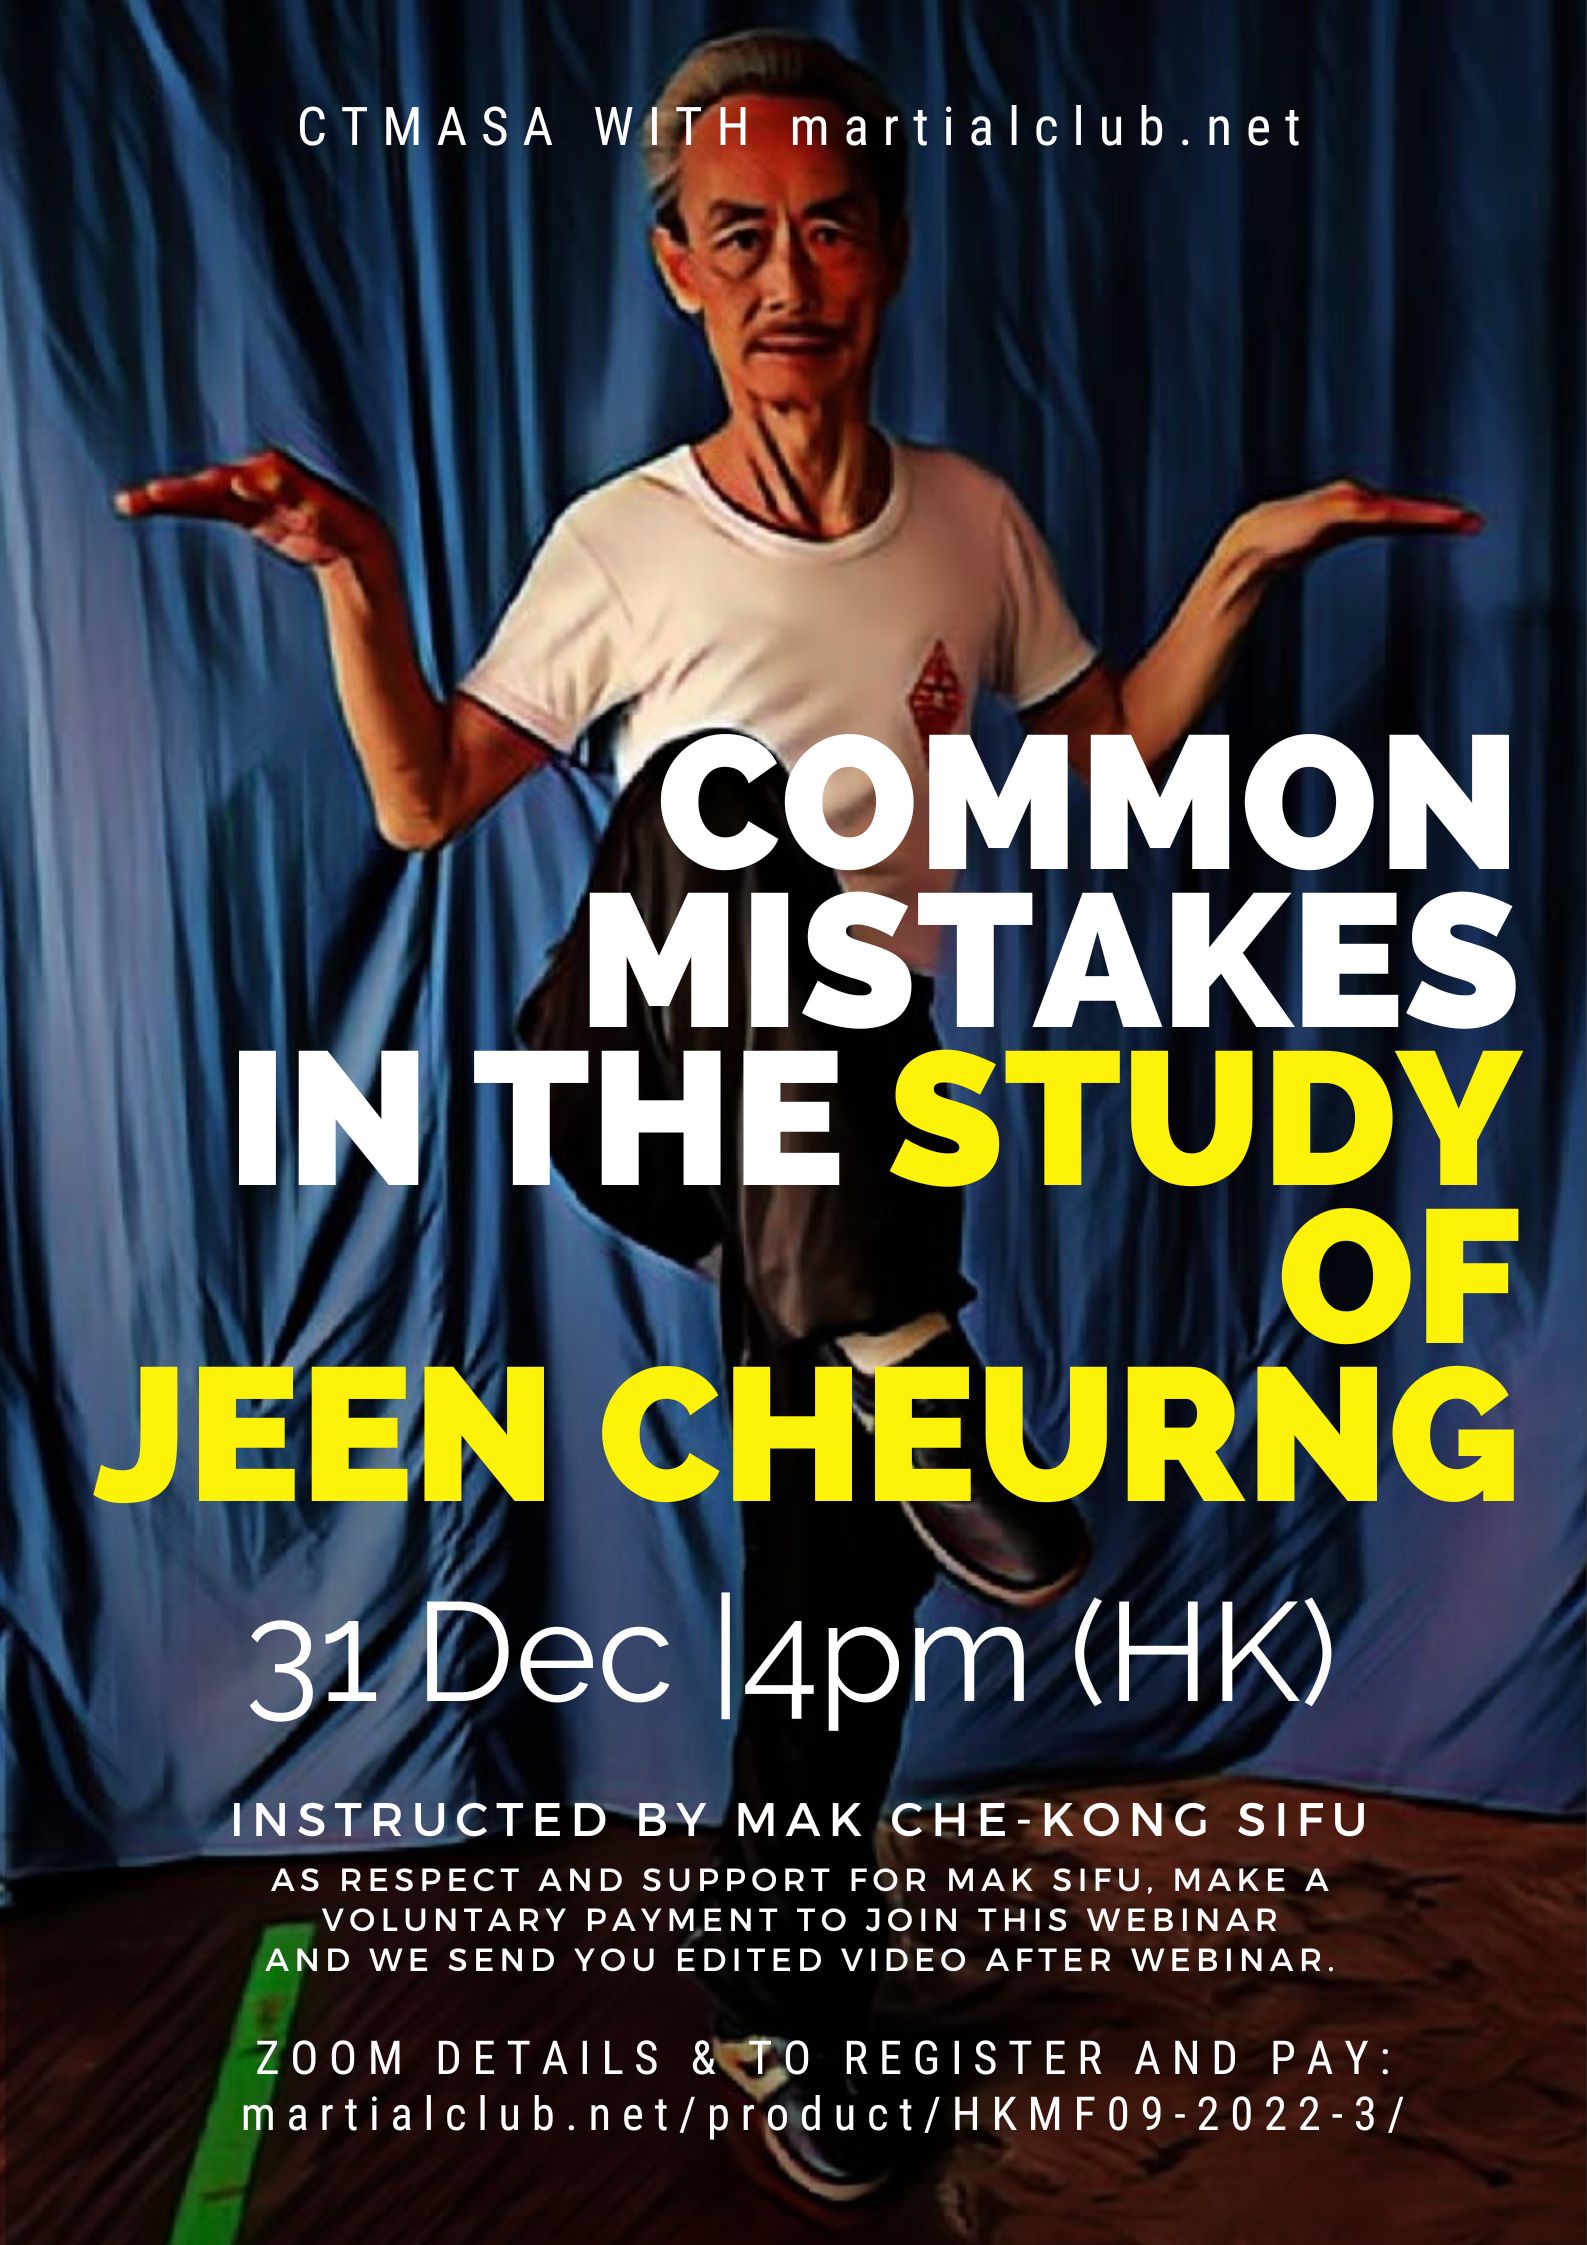 Common Mistakes in the Study of 3 Jeen Cheurng